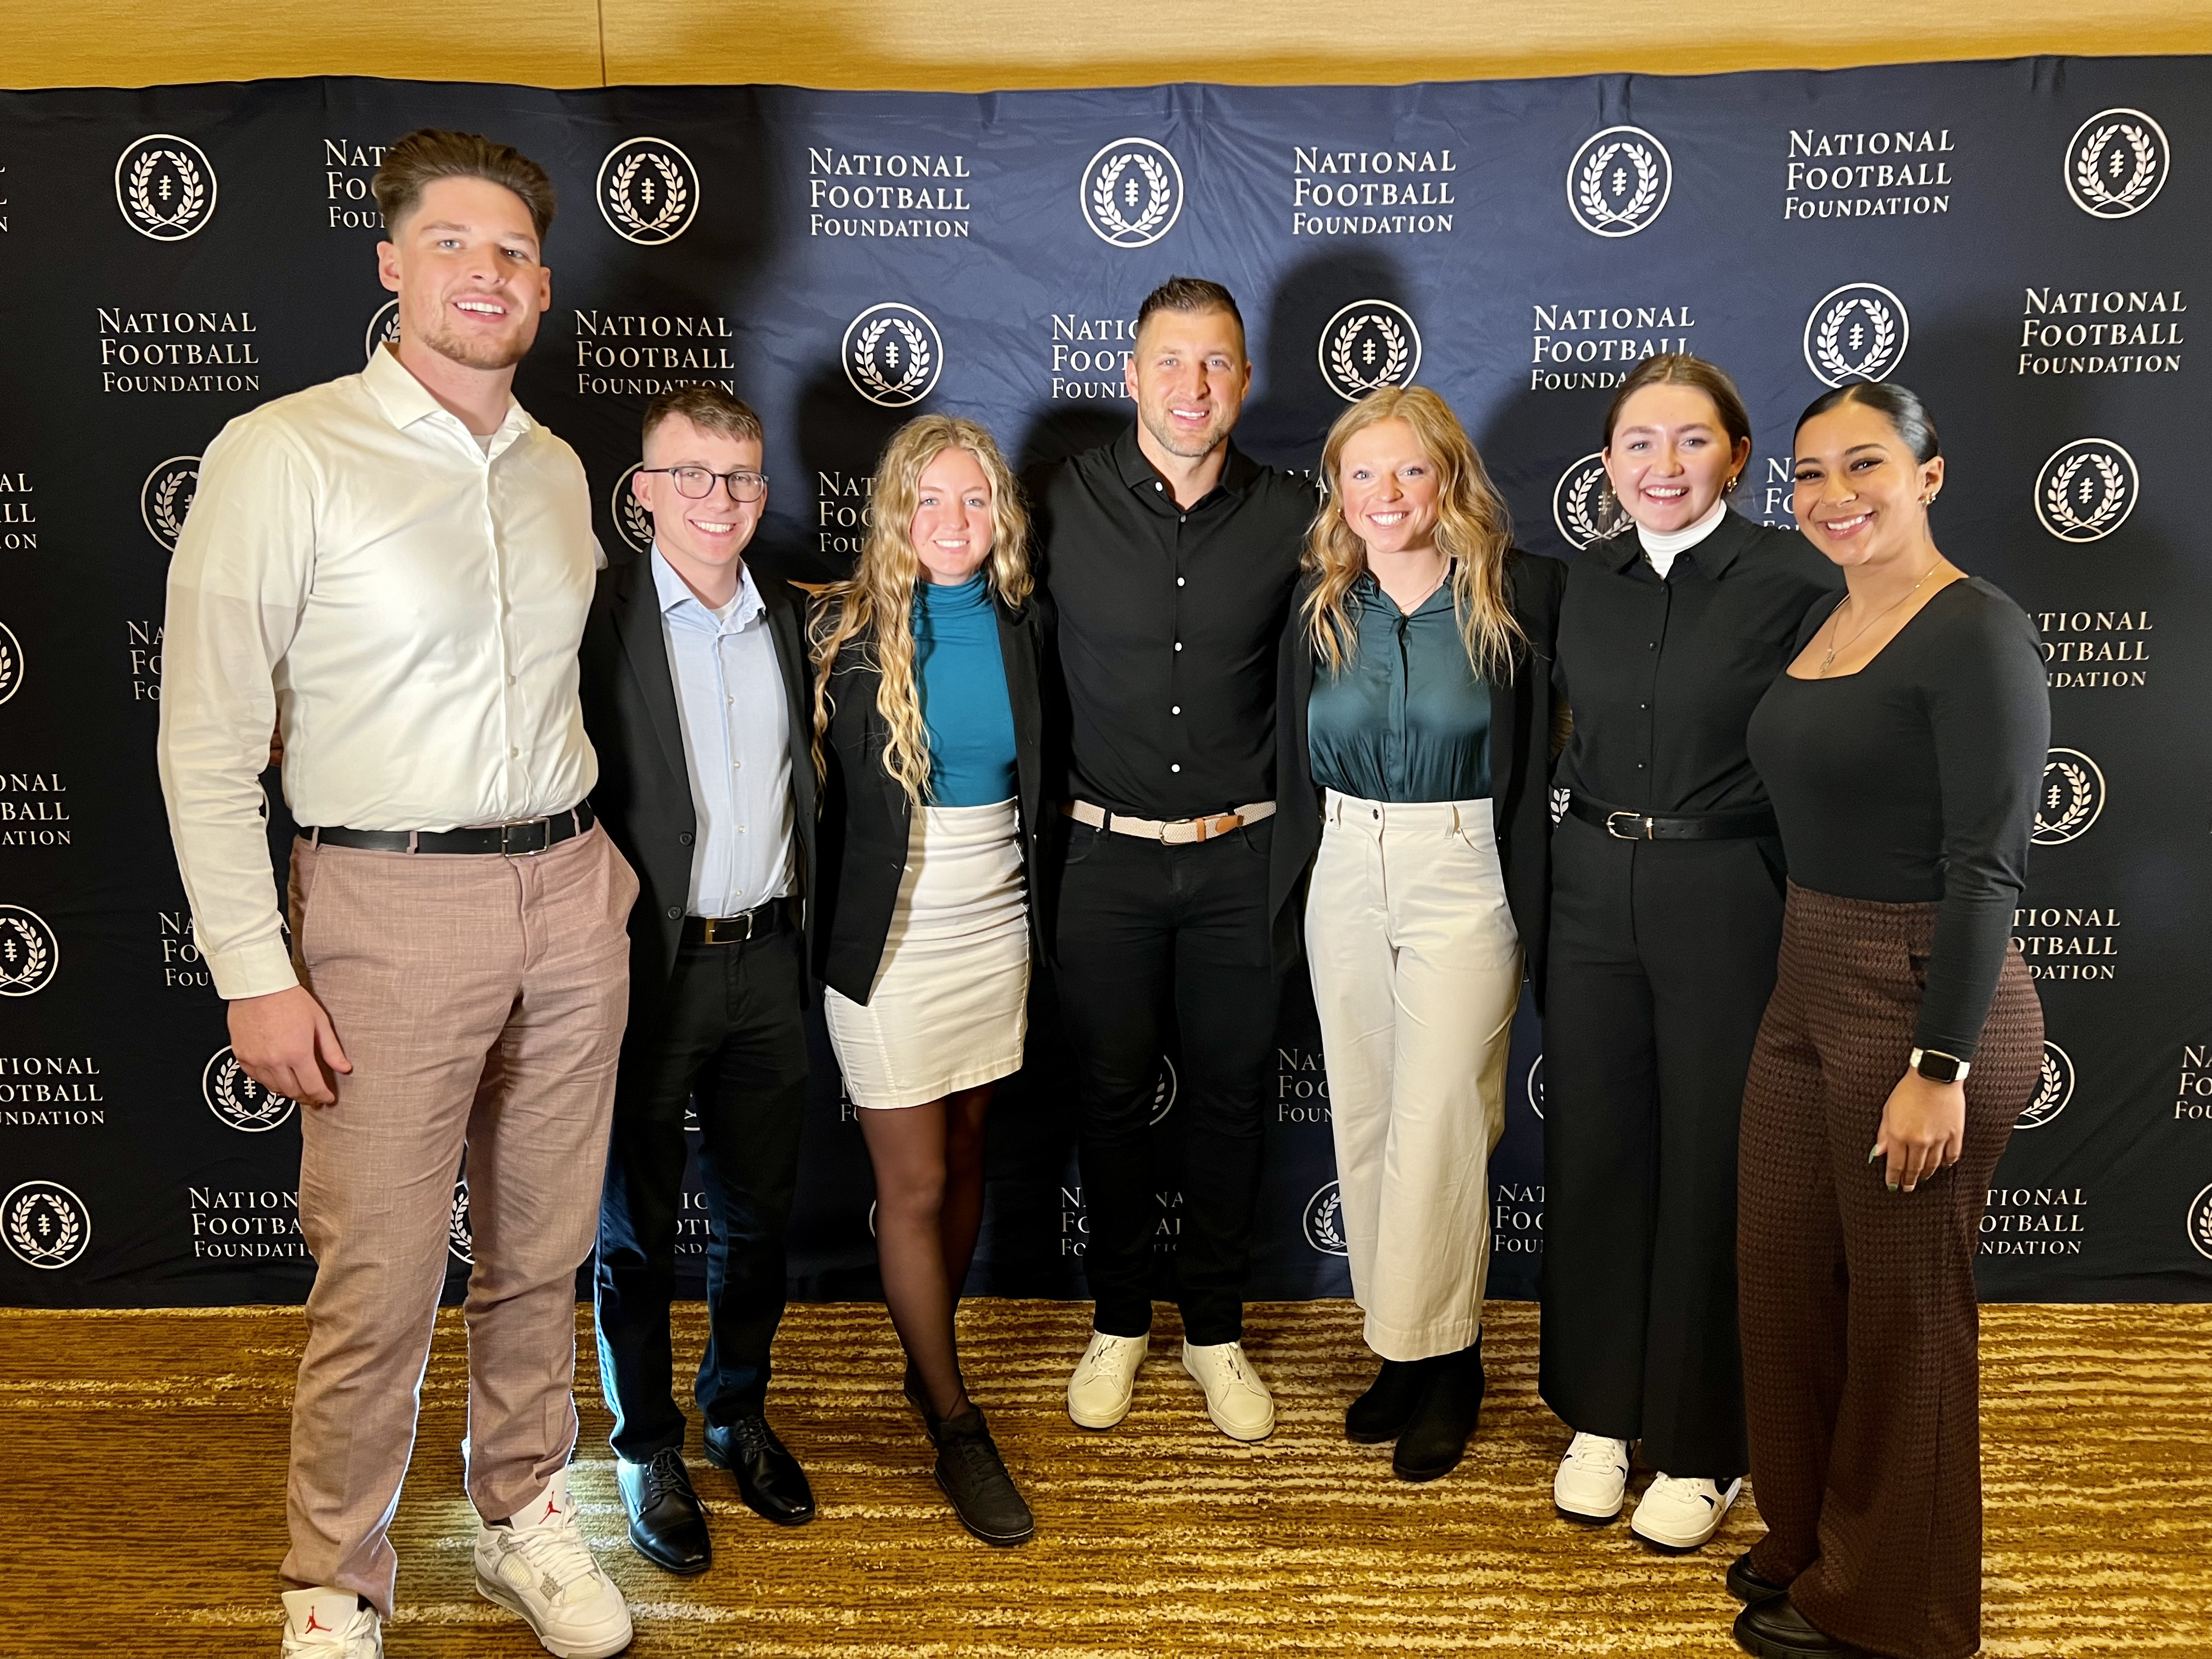 Idaho State University Human Performance and Sport Studies students attend the 2023 National Football Foundation Hall of Fame Awards in Las Vegas.